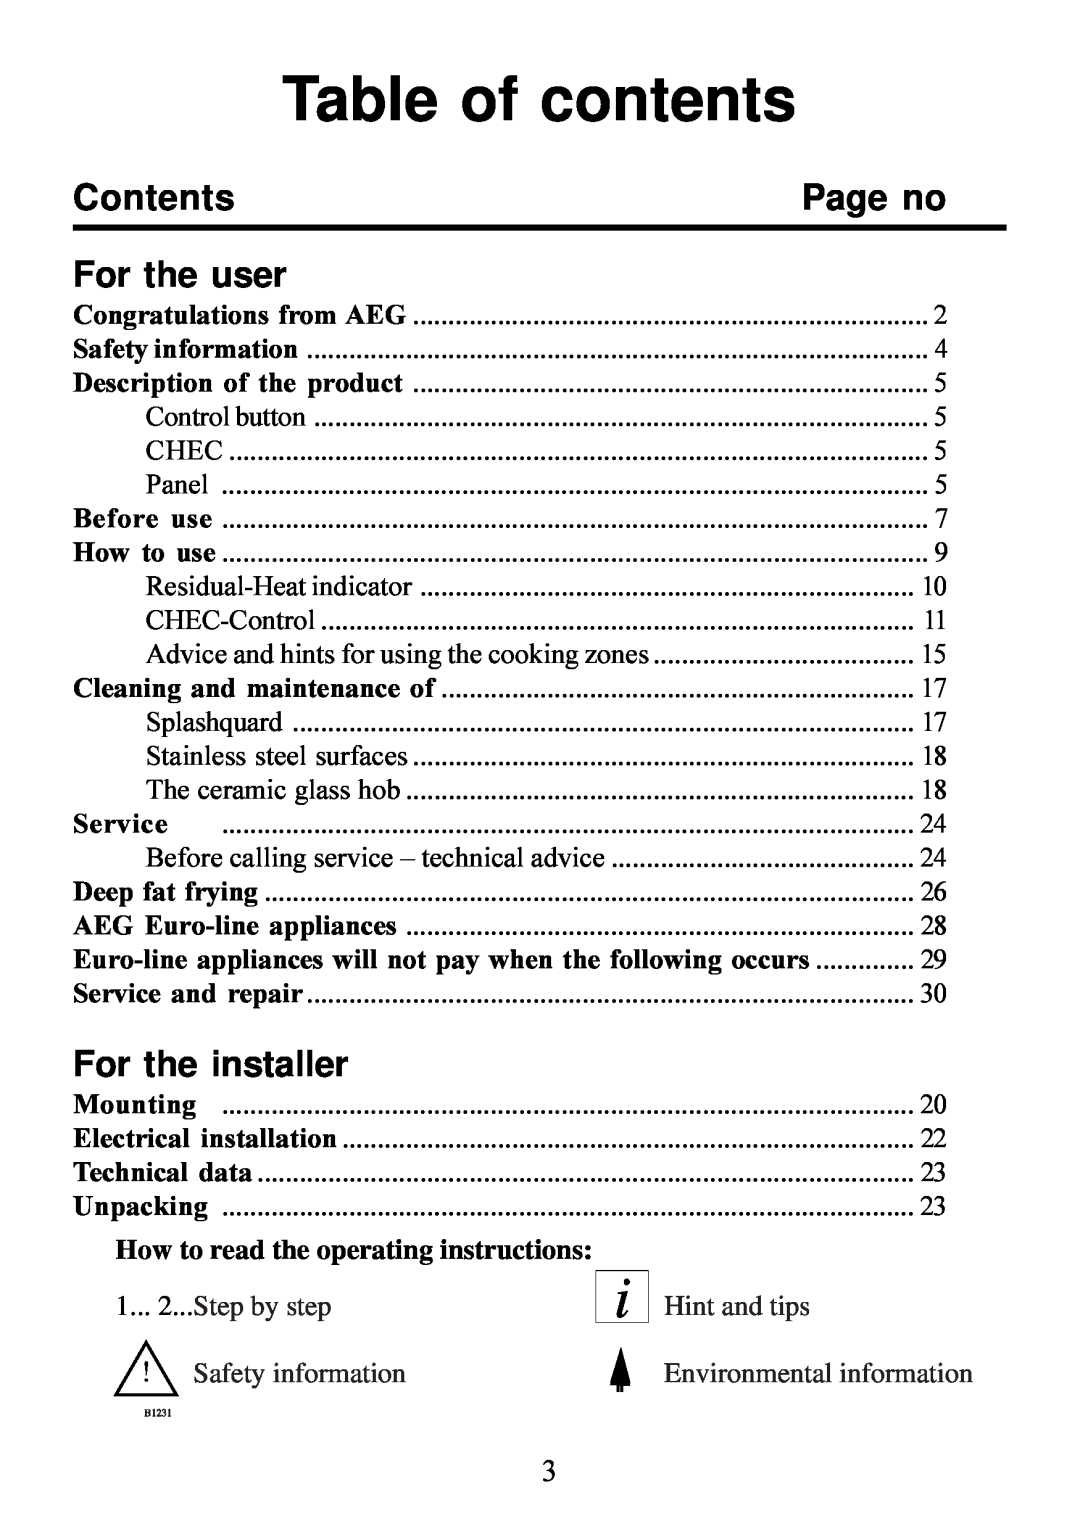 AEG 6510K7-M Table of contents, Contents, For the user, For the installer, How to read the operating instructions, Page no 